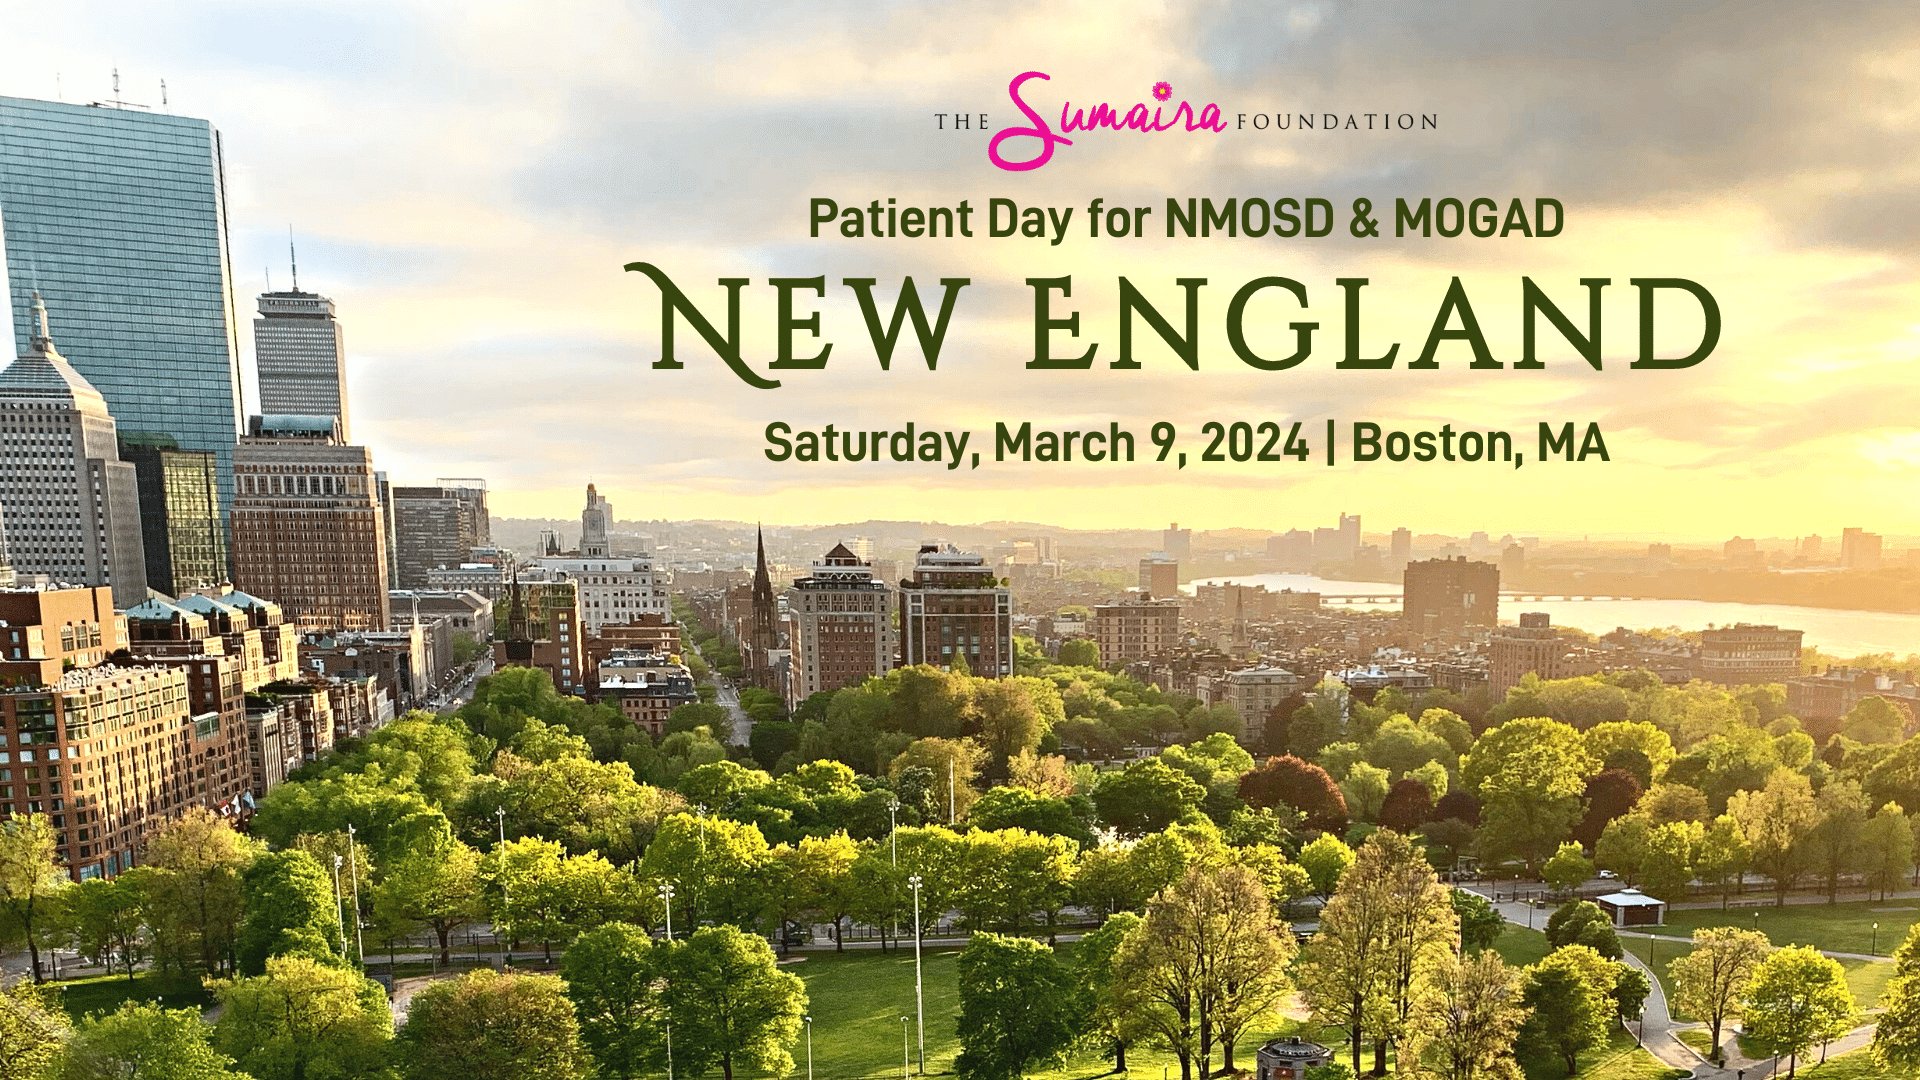 TSF's New England Patient Day for NMOSD & MOGAD | The Sumaira Foundation